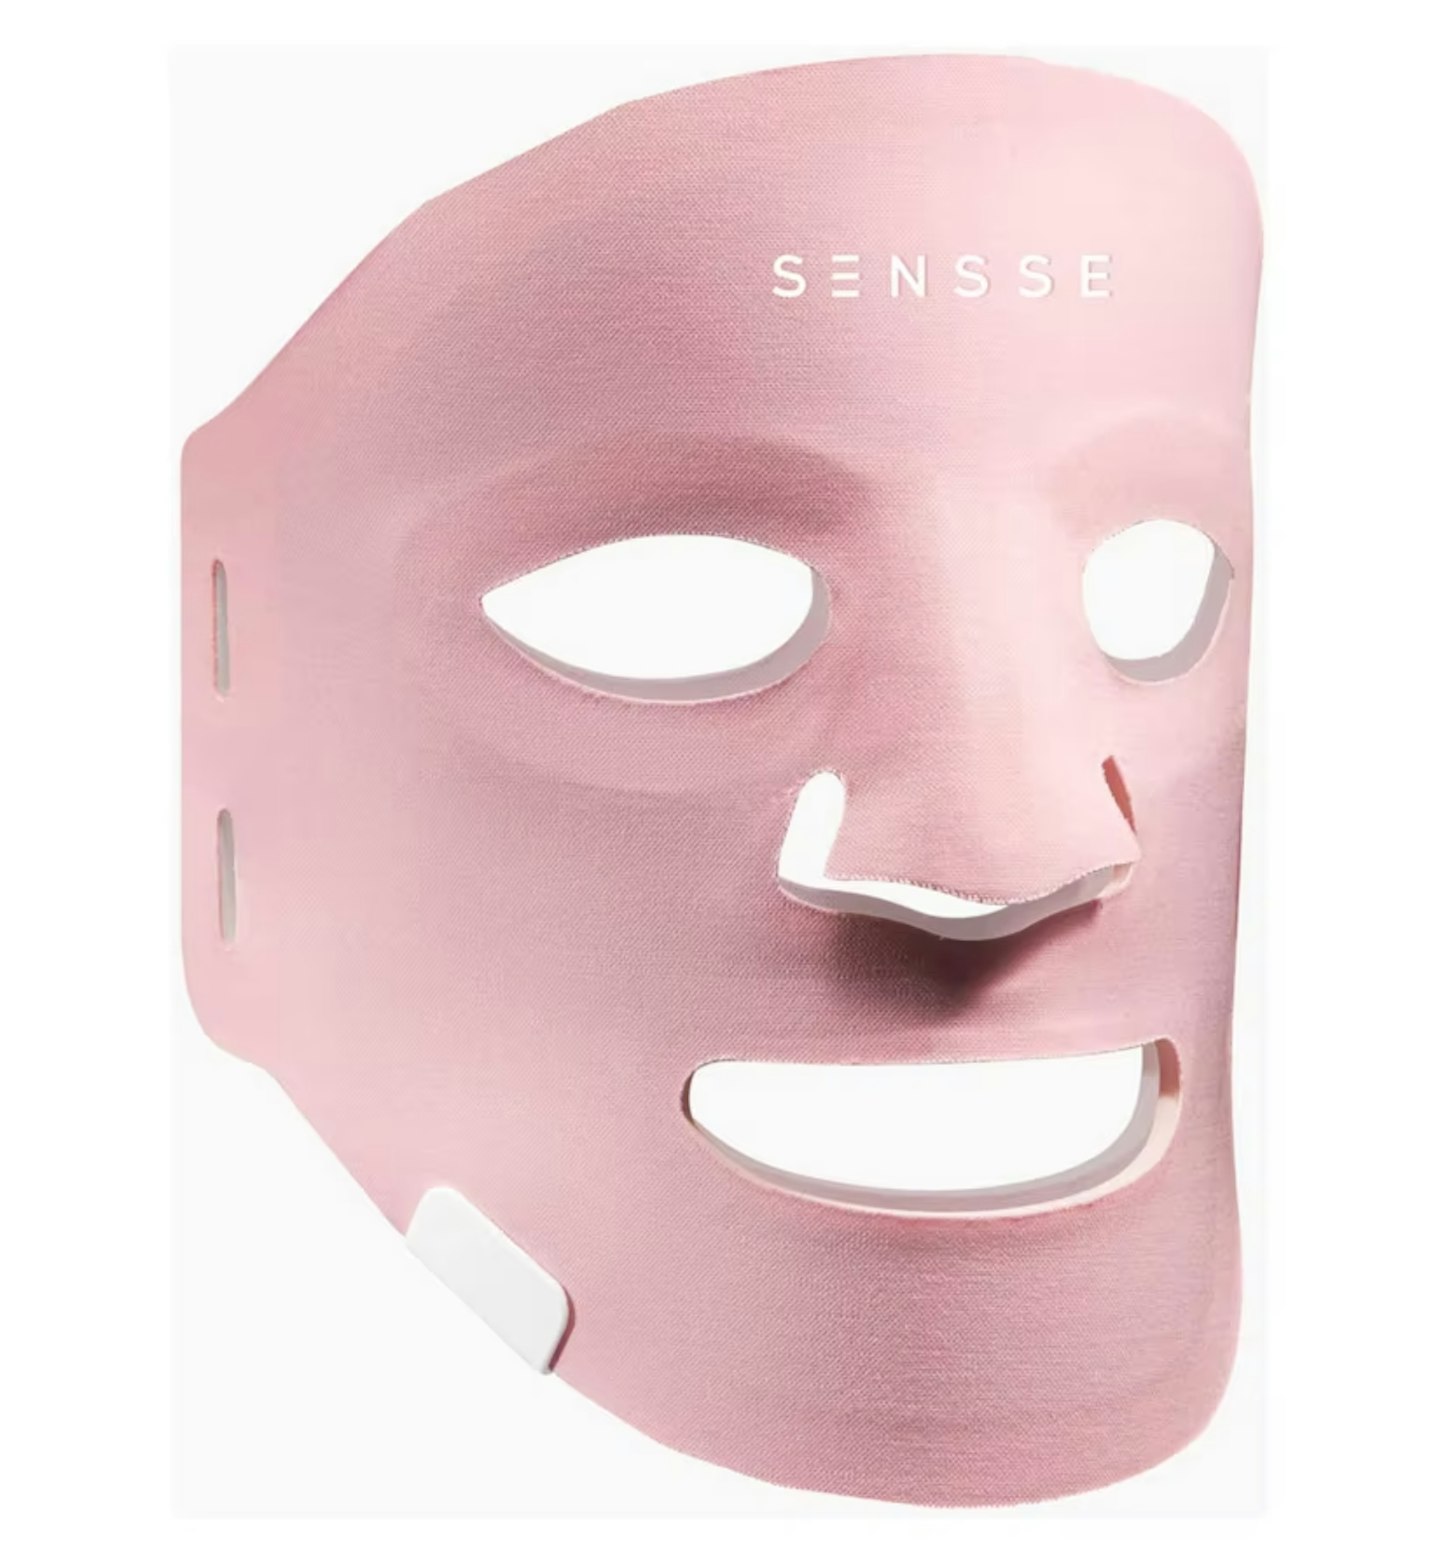 Sensse Professional LED Light Therapy Face Mask